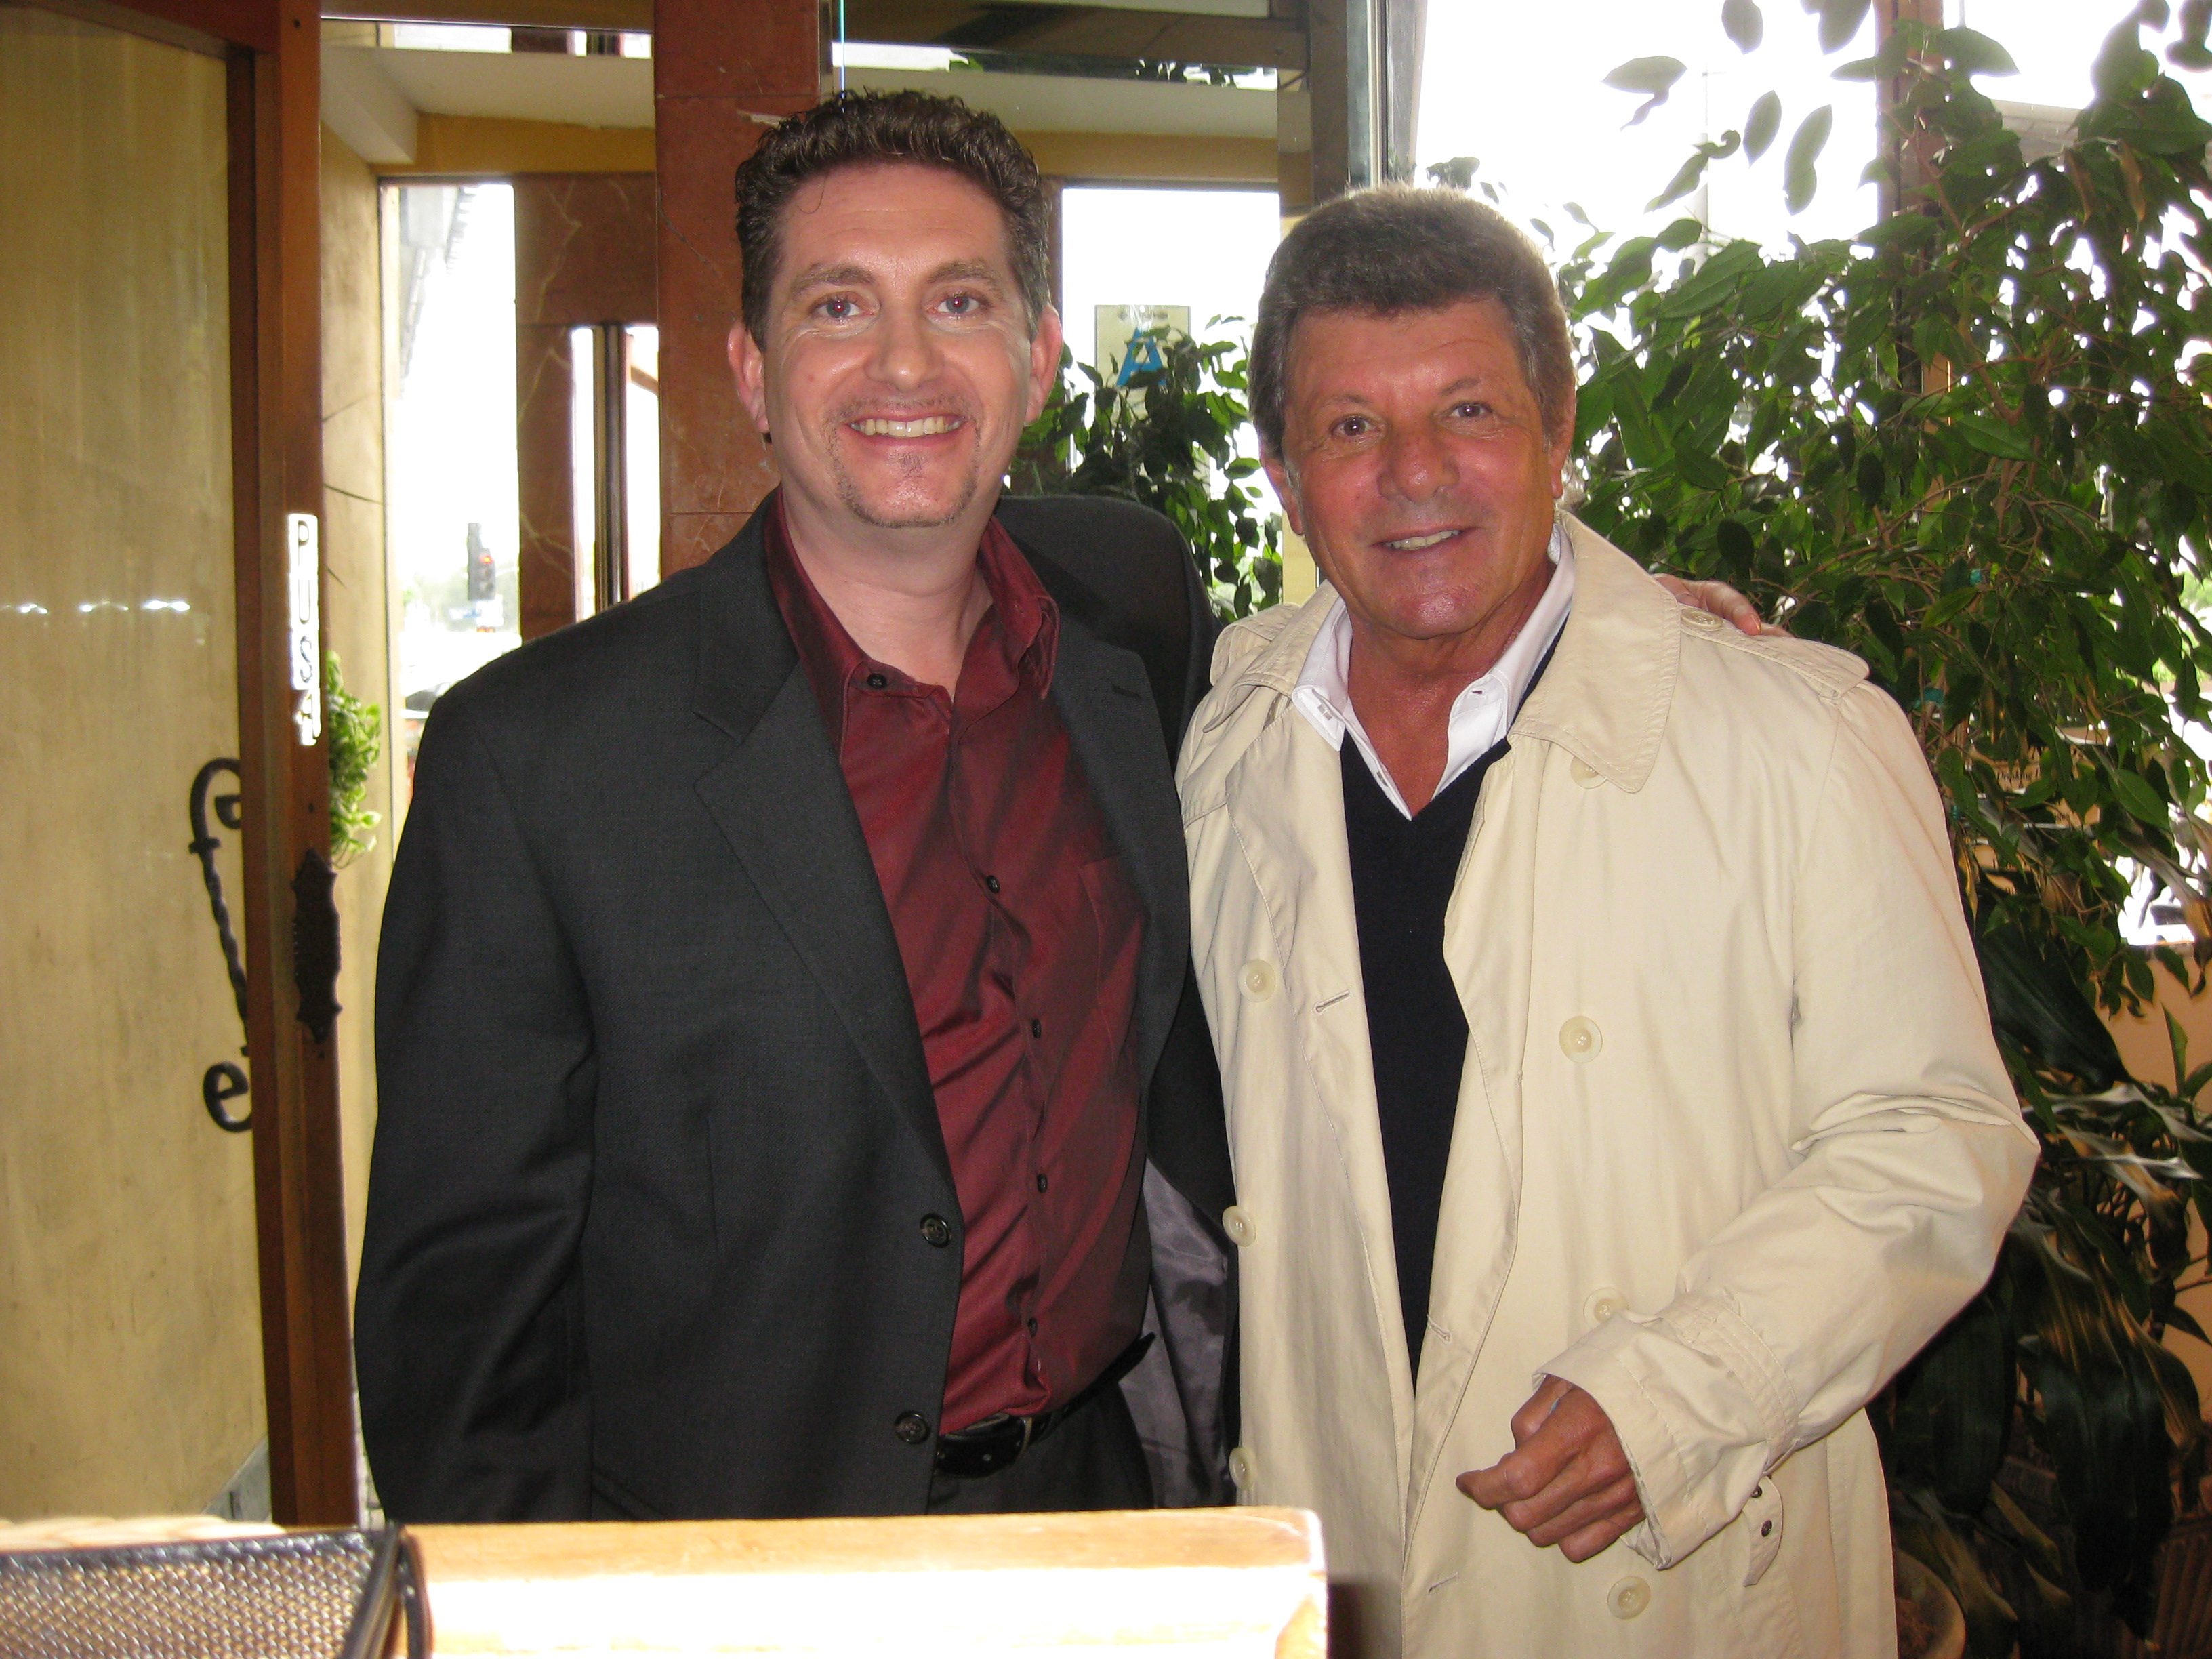 Frankie Avalon and Michael Christaldi after shooting a commercial at Sicily restaurant in Sherman Oaks CA.